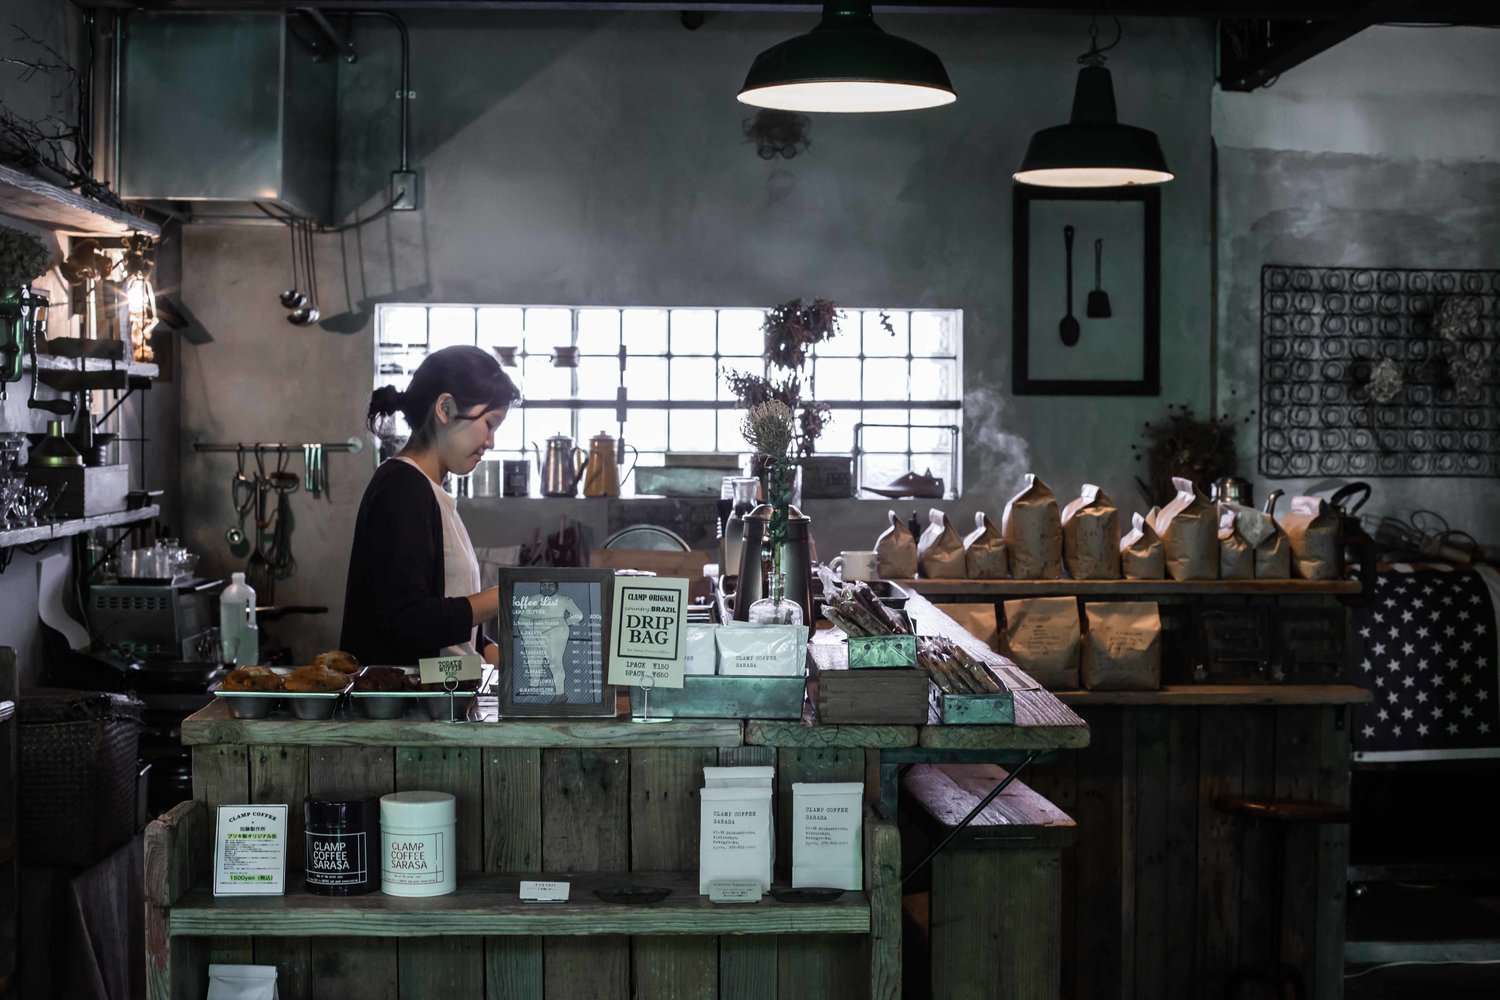 What would your ideal cafe look like? How to open a dream coffee shop?